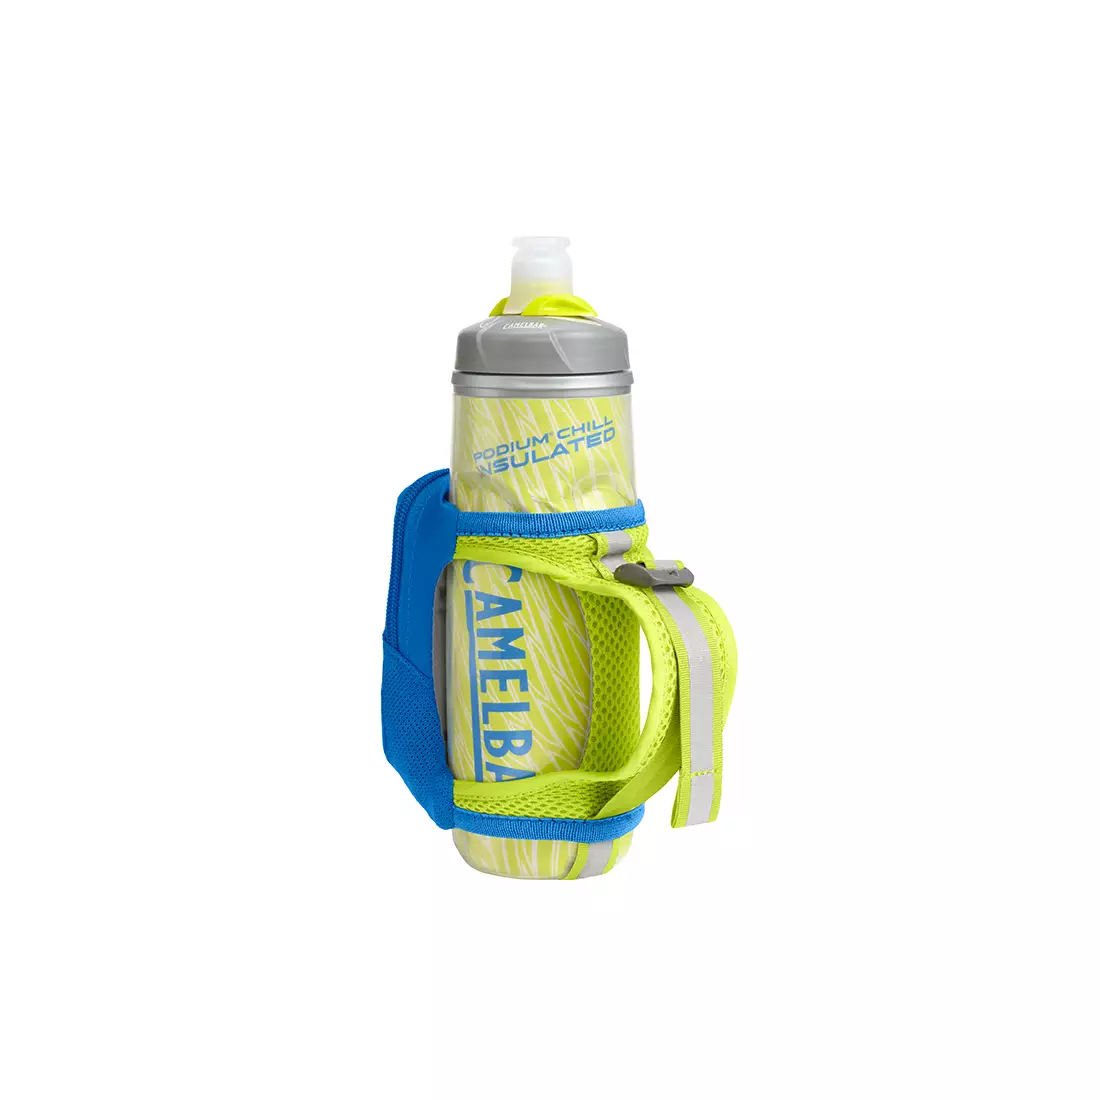 CAMELBAK Quick Grip Chill Thermoflasche 21oz/ 621 ml Electric Blue INTL 62432-IN SS16